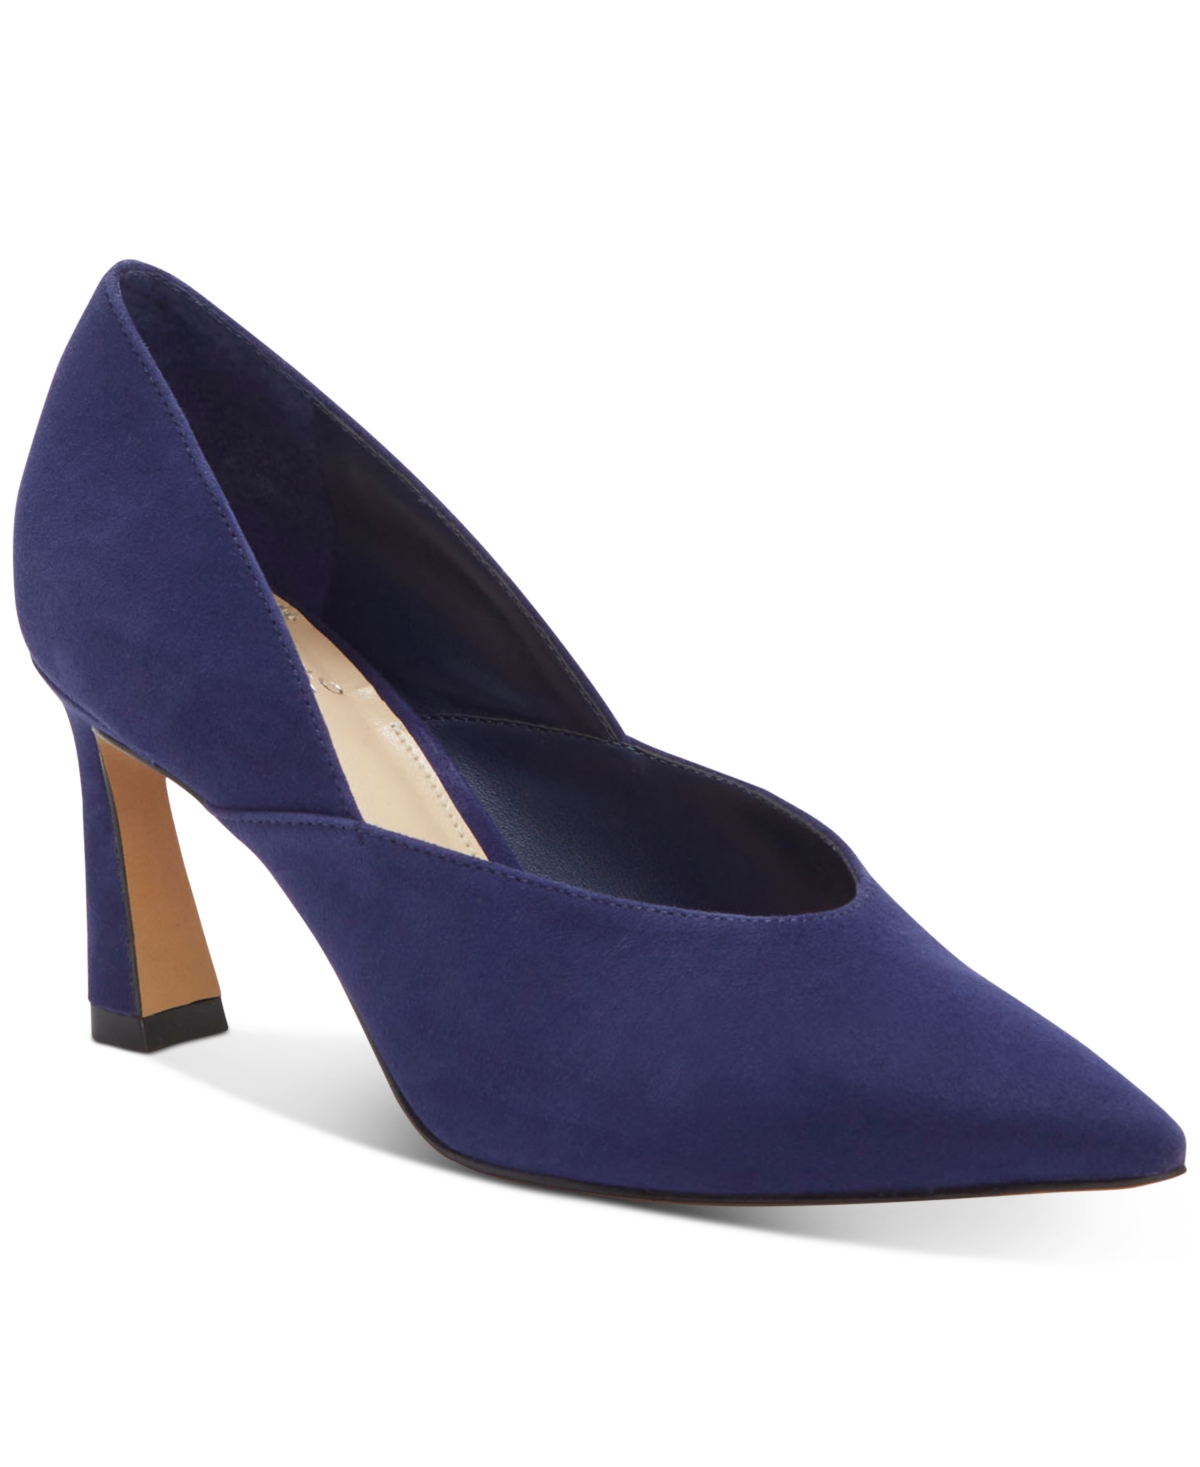 UPC 191707307452 product image for Vince Camuto Women's Kastani Pointed-Toe Pumps Women's Shoes | upcitemdb.com